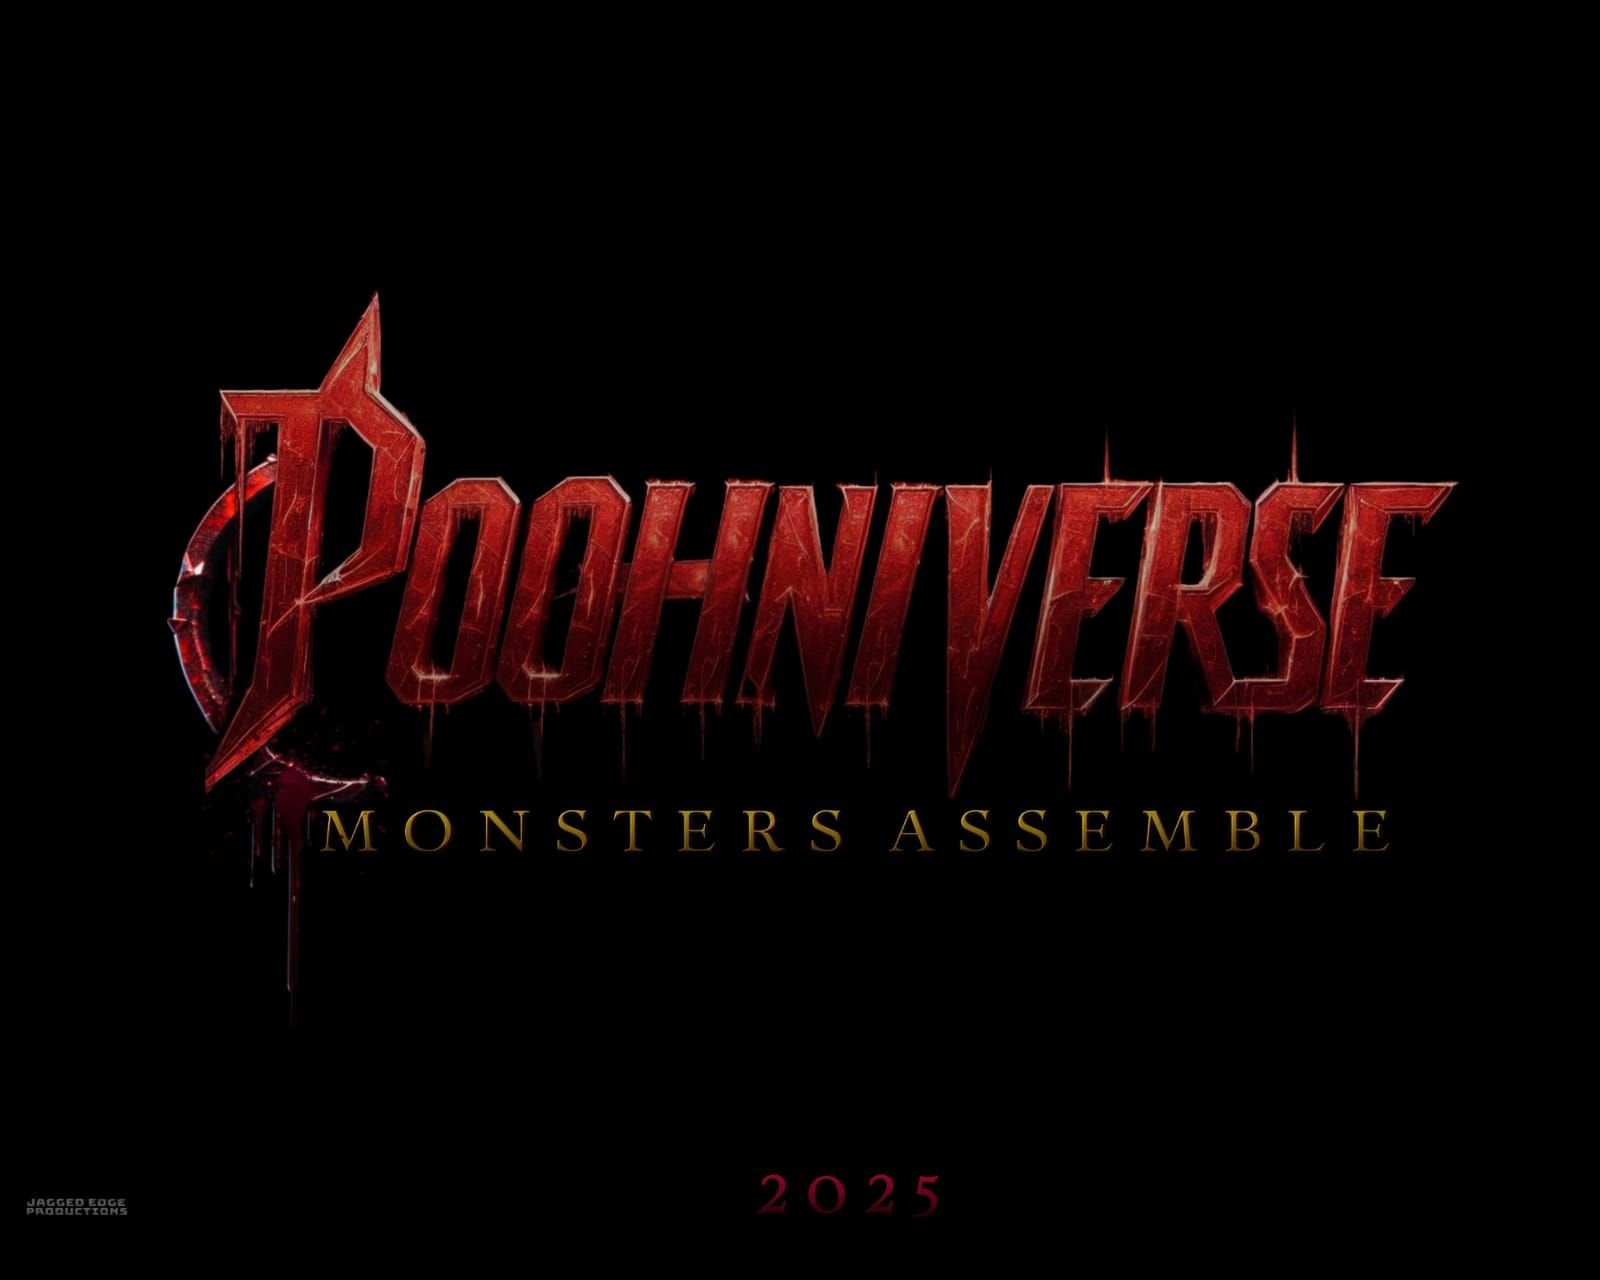 Poohniverse: Monsters Assemble - movie still